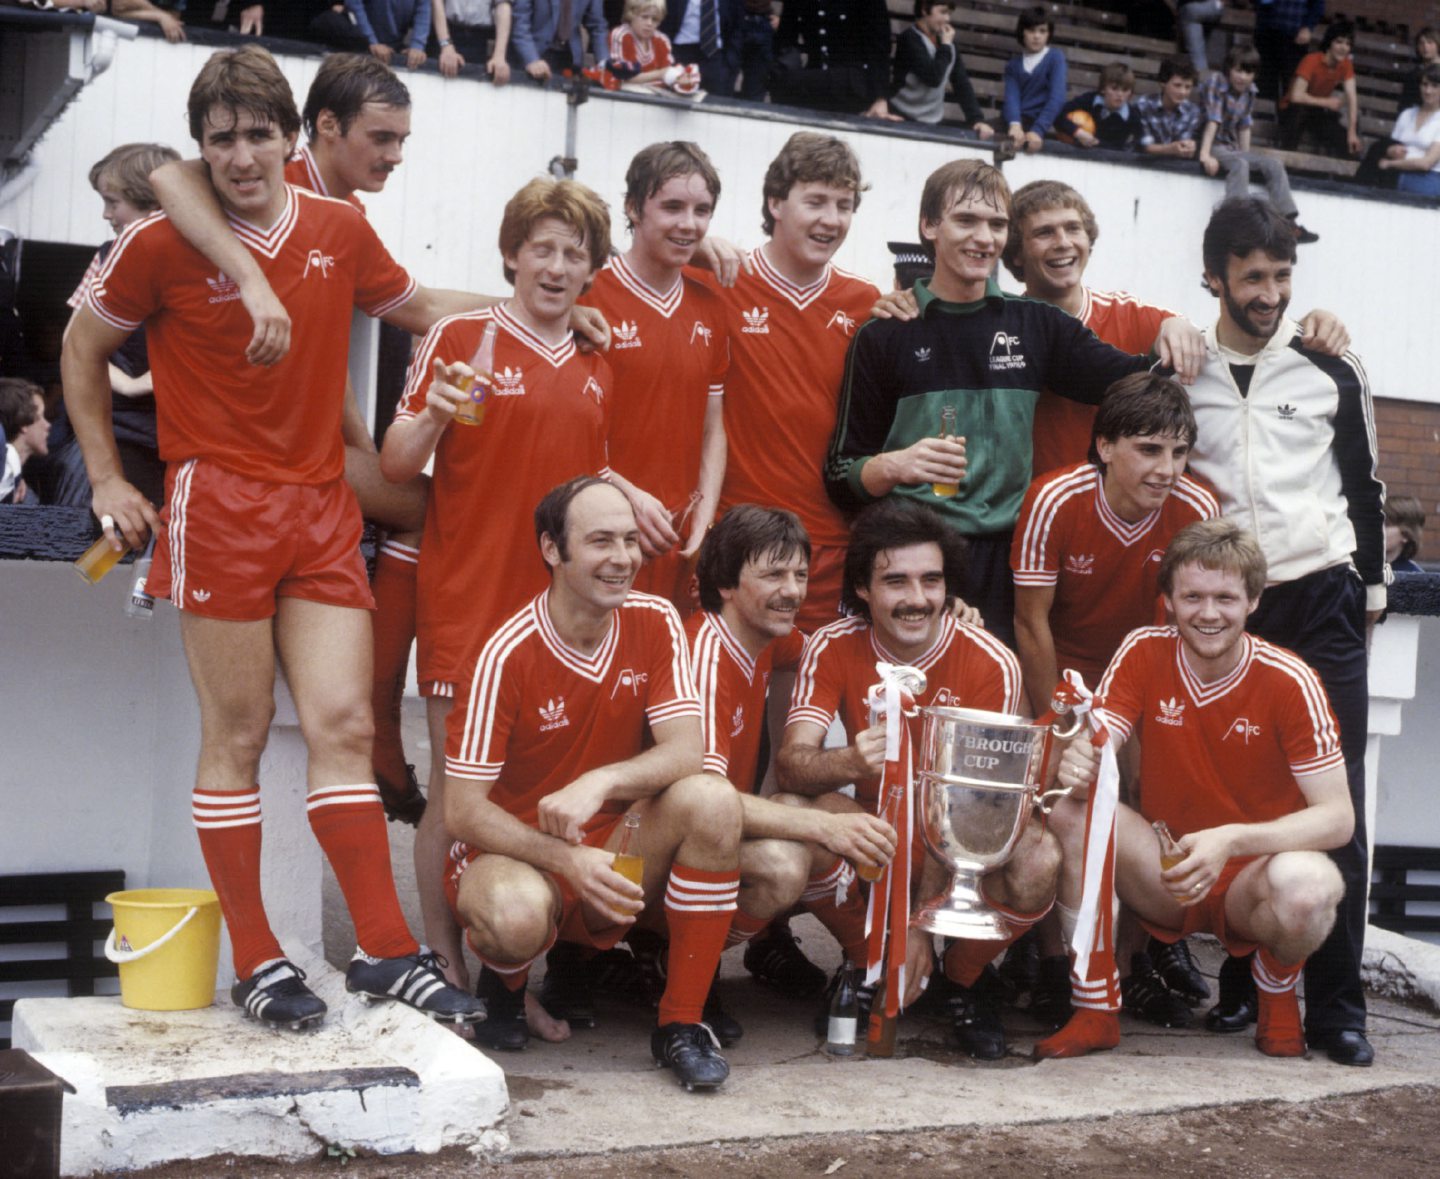 The Aberdeen squad celebrate winning the Drybrough Cup in 1980.